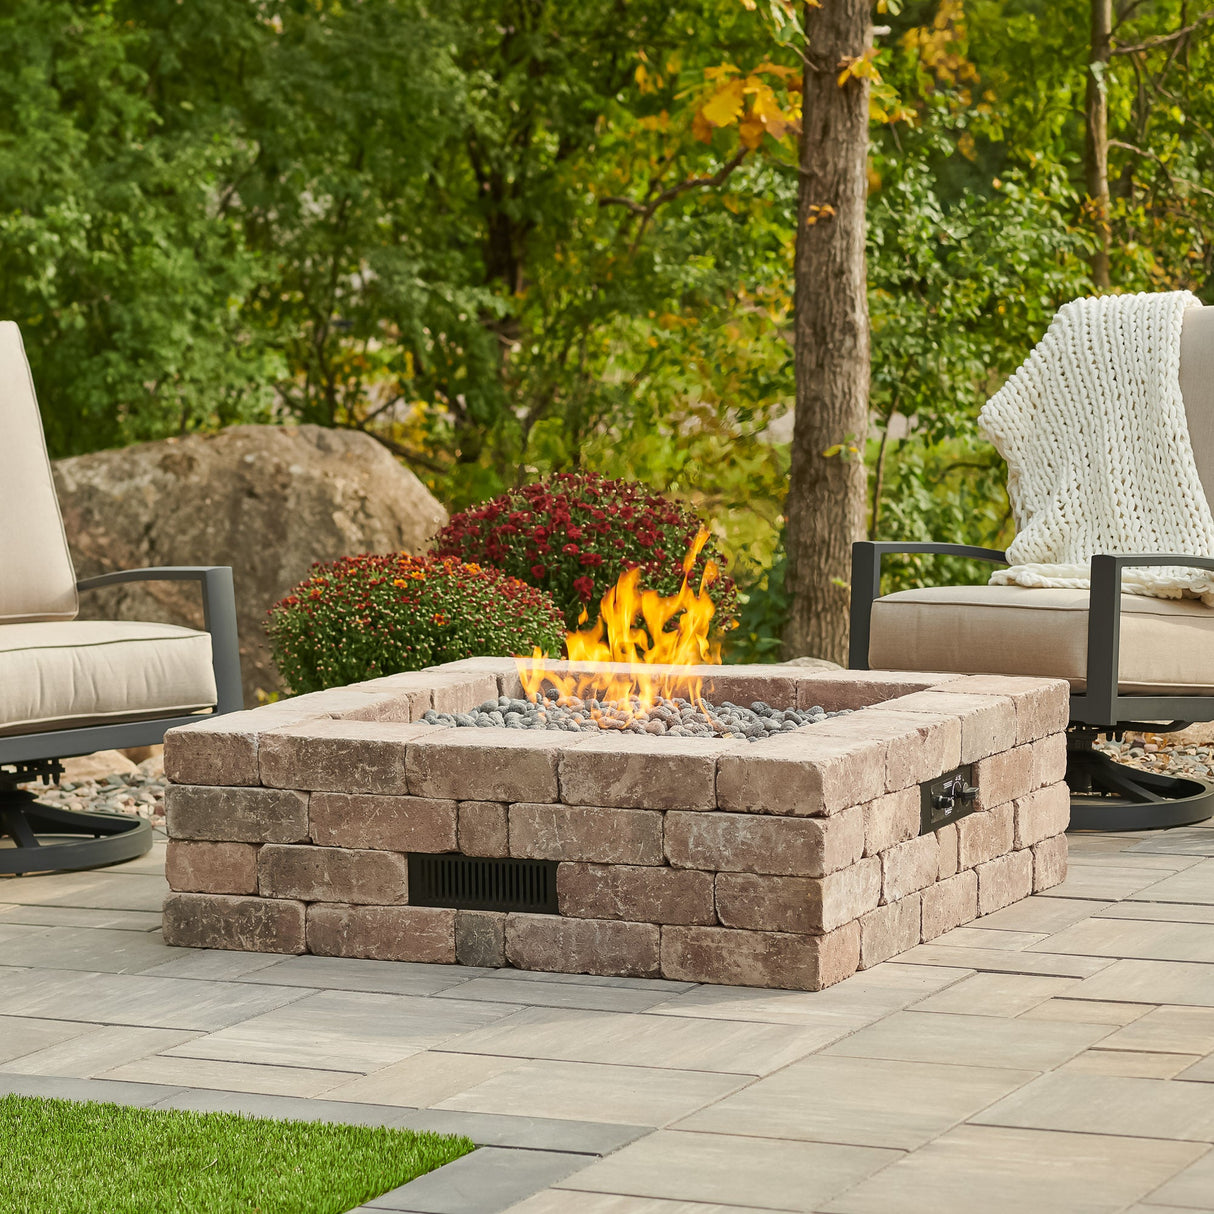 The Bronson Block Square Gas Fire Pit Kit in a scenic patio setting surrounded by patio furniture